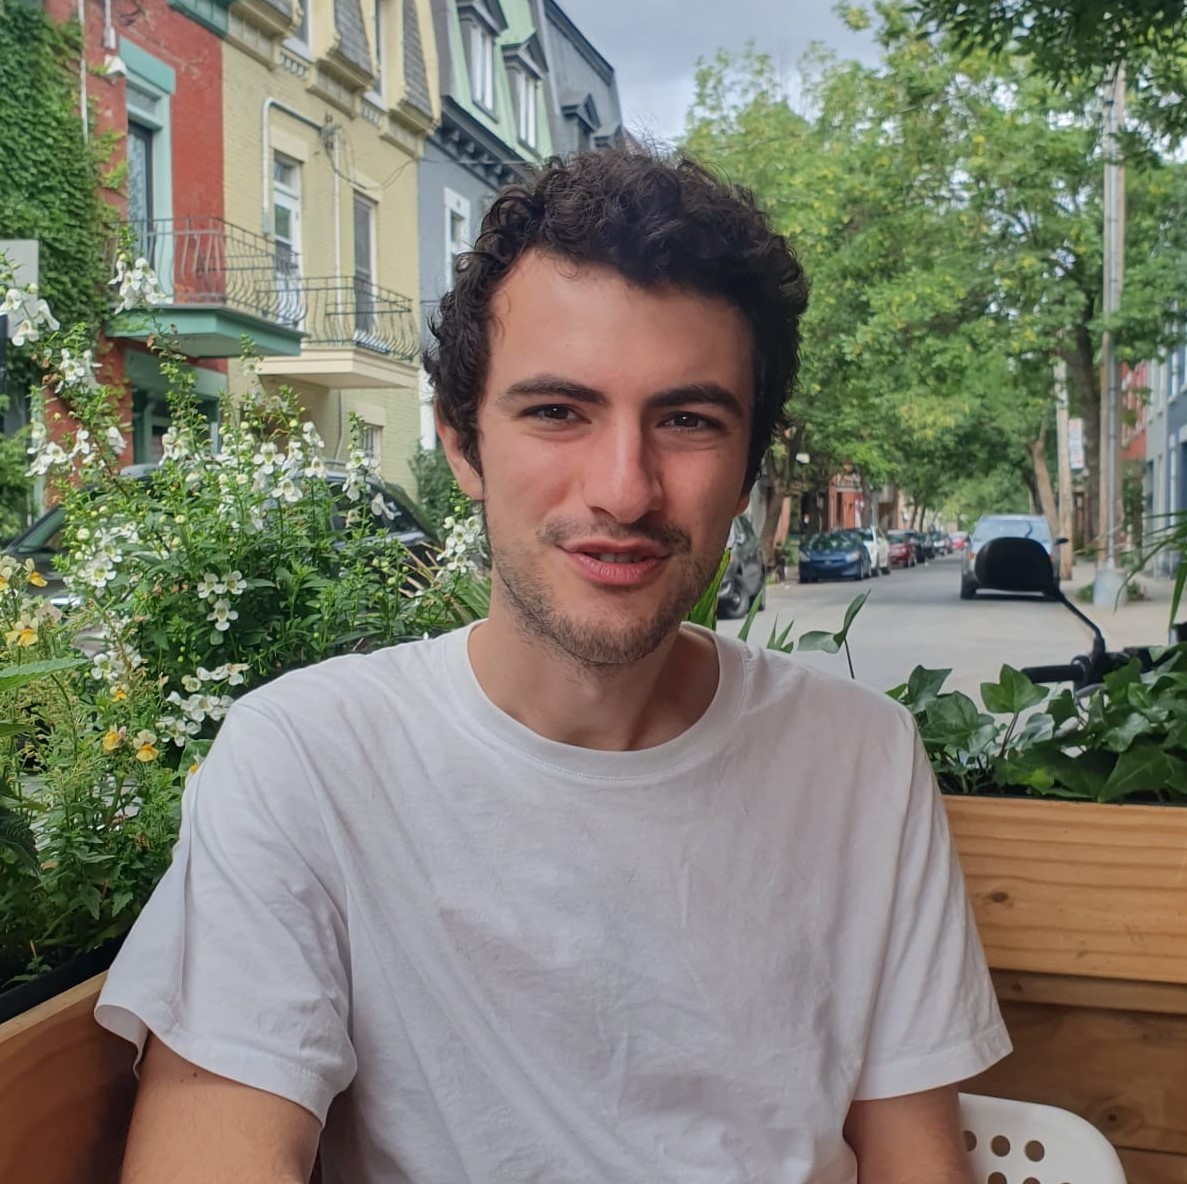 We are happy to welcome @CouckeNicolas as a postdoc! He'll study collective decision-making using hyperscanning and neural decoding. His goal is to aid conflict resolution and mediation in complex social contexts, like post-genocide reconciliation and restorative justice.